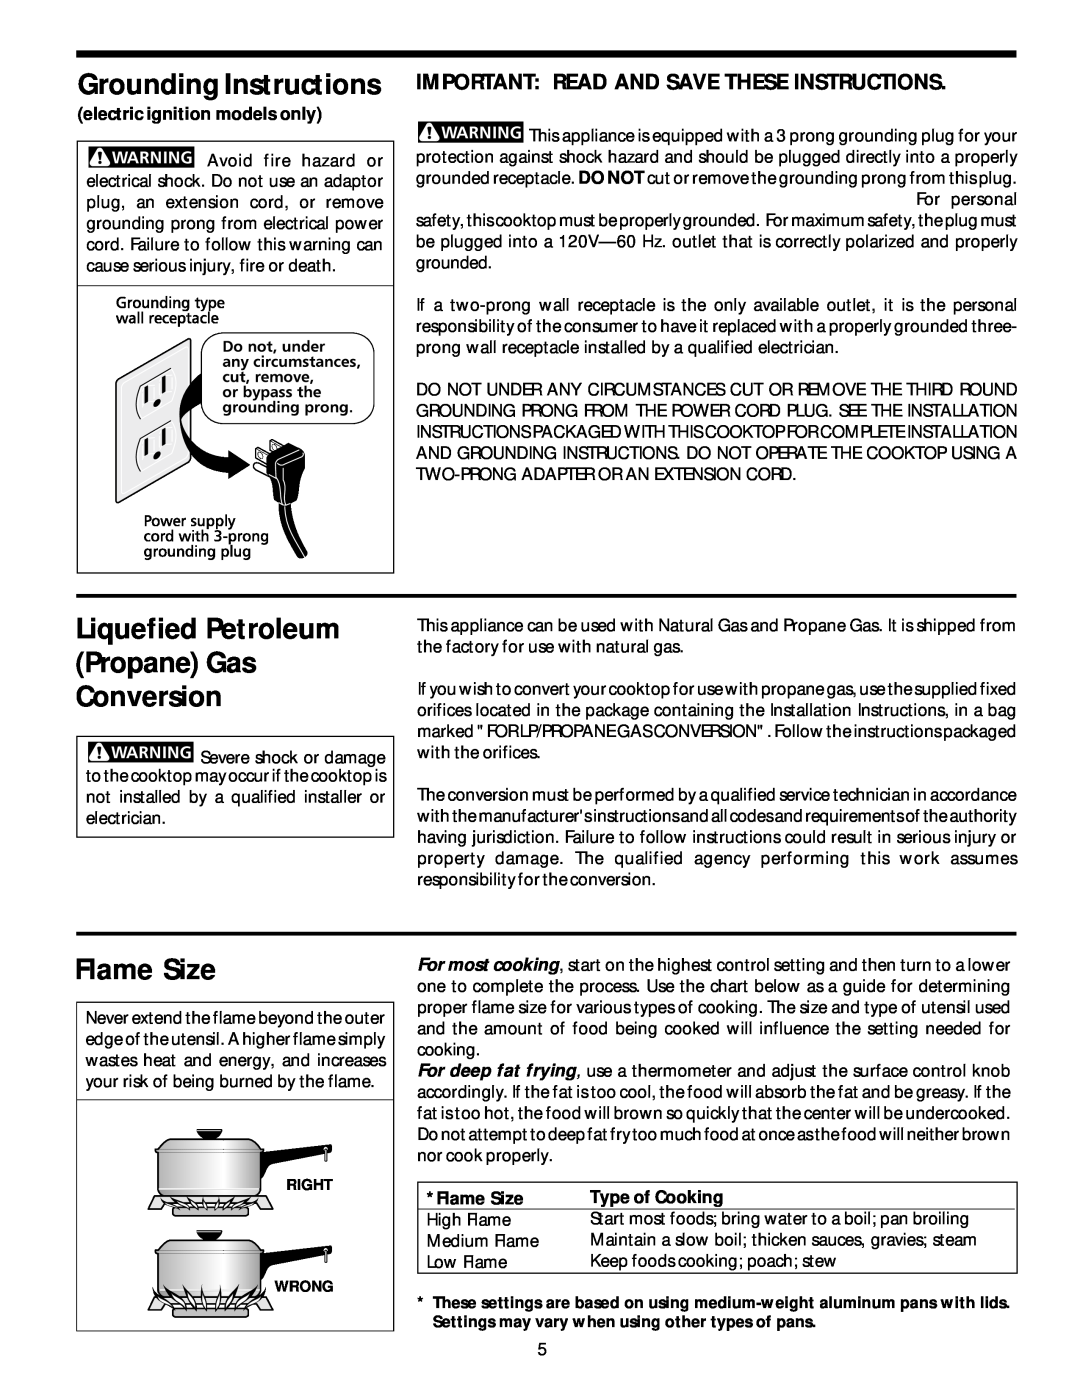 Frigidaire 318068129 Grounding Instructions, Liquefied Petroleum Propane Gas Conversion, Flame Size, Type of Cooking 